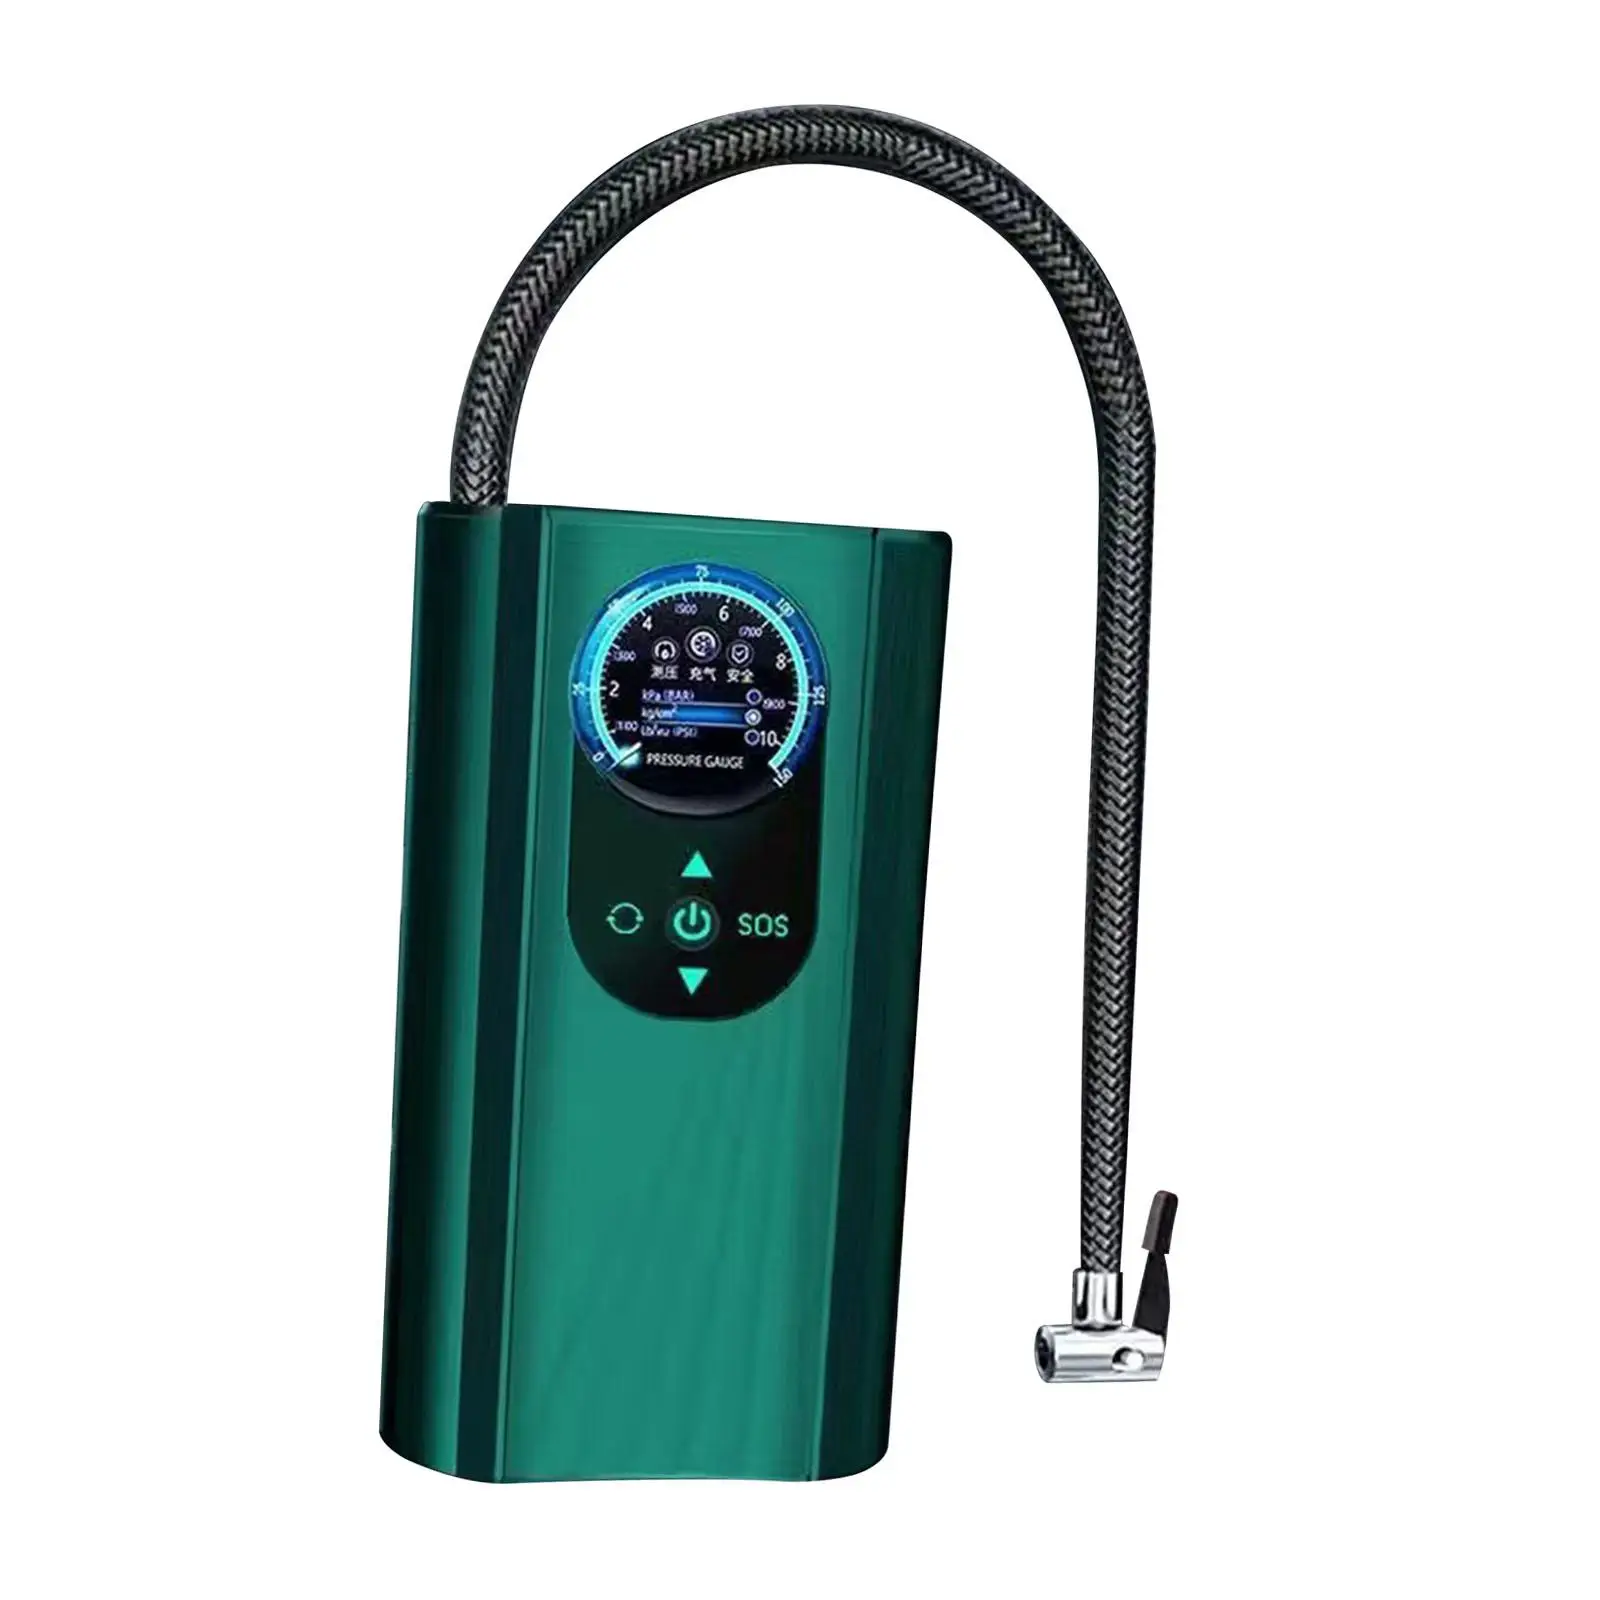 Portable Air Compressor Handheld Fast with Pressure Gauge Bike Pump Electric Tire Pump for Bicycle Ball SUV Car Basketball